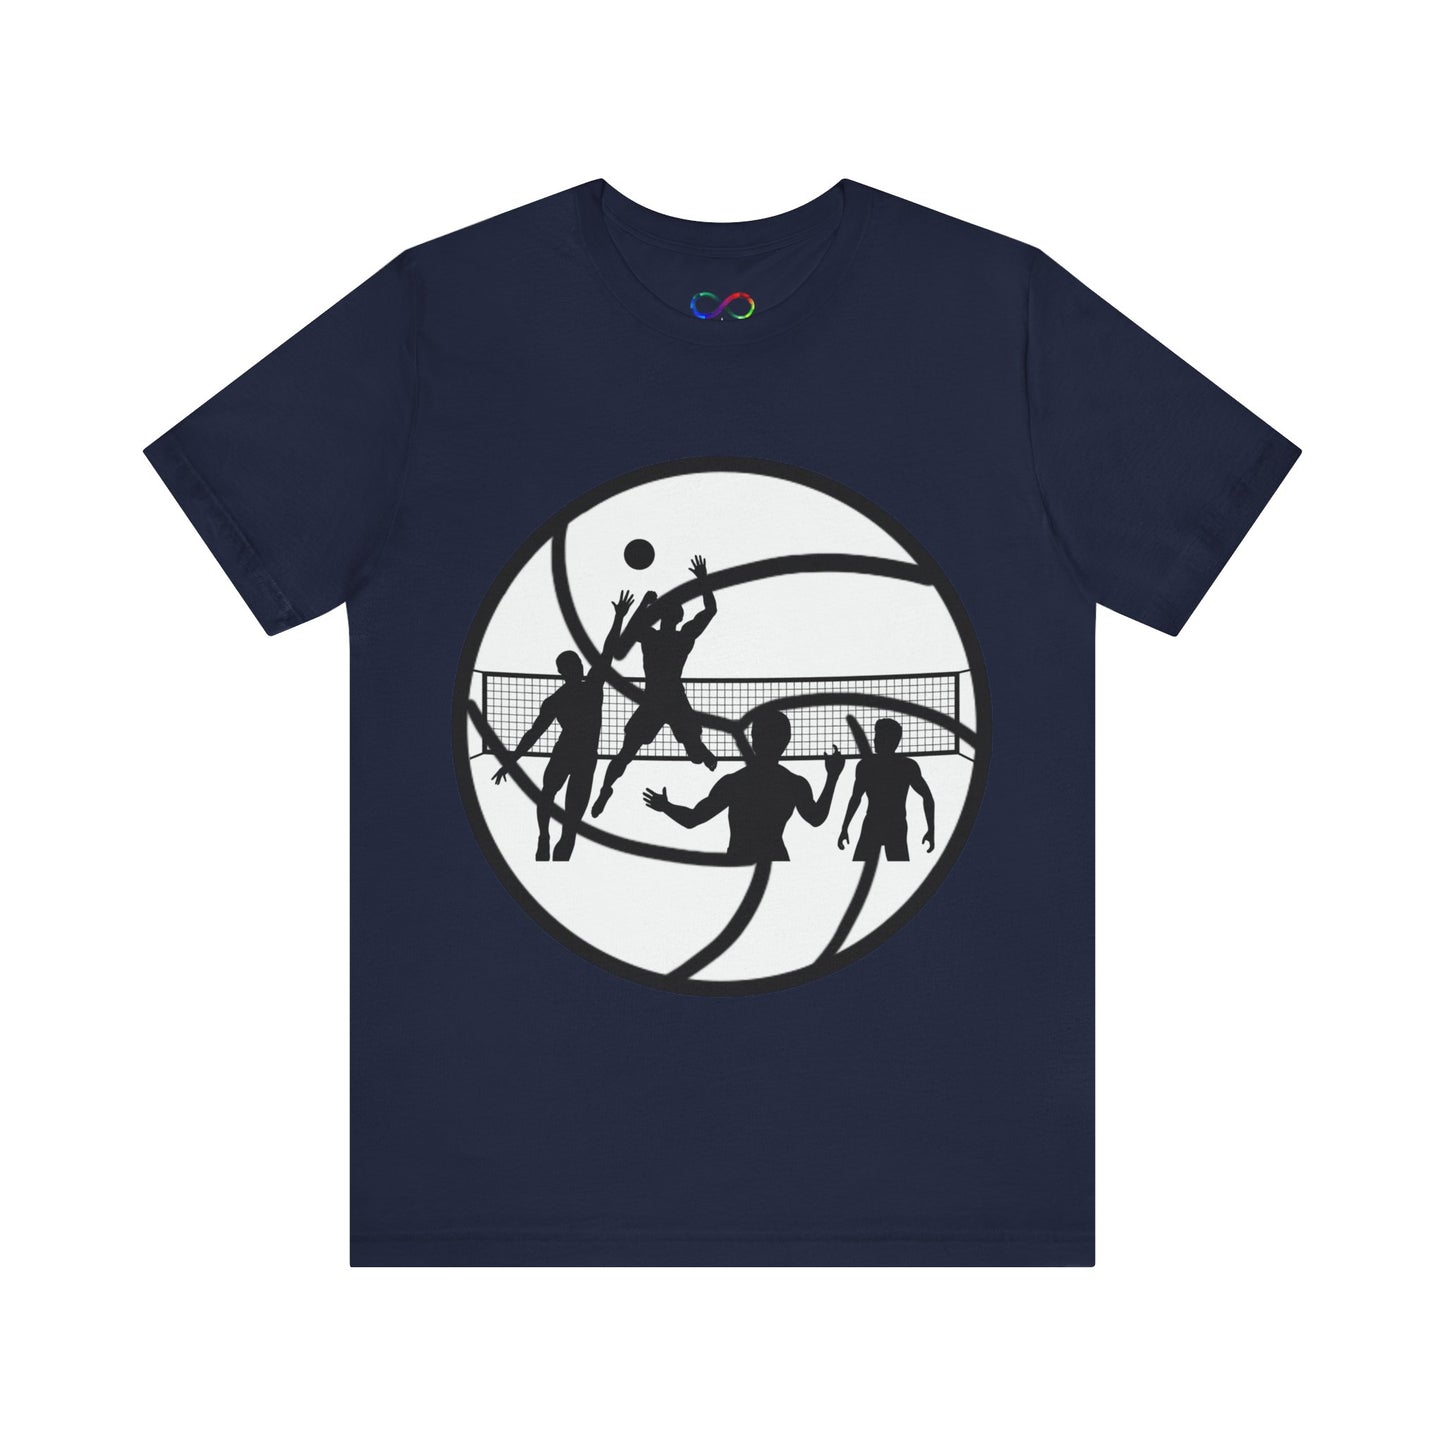 Volleyball silhouette t-shirt